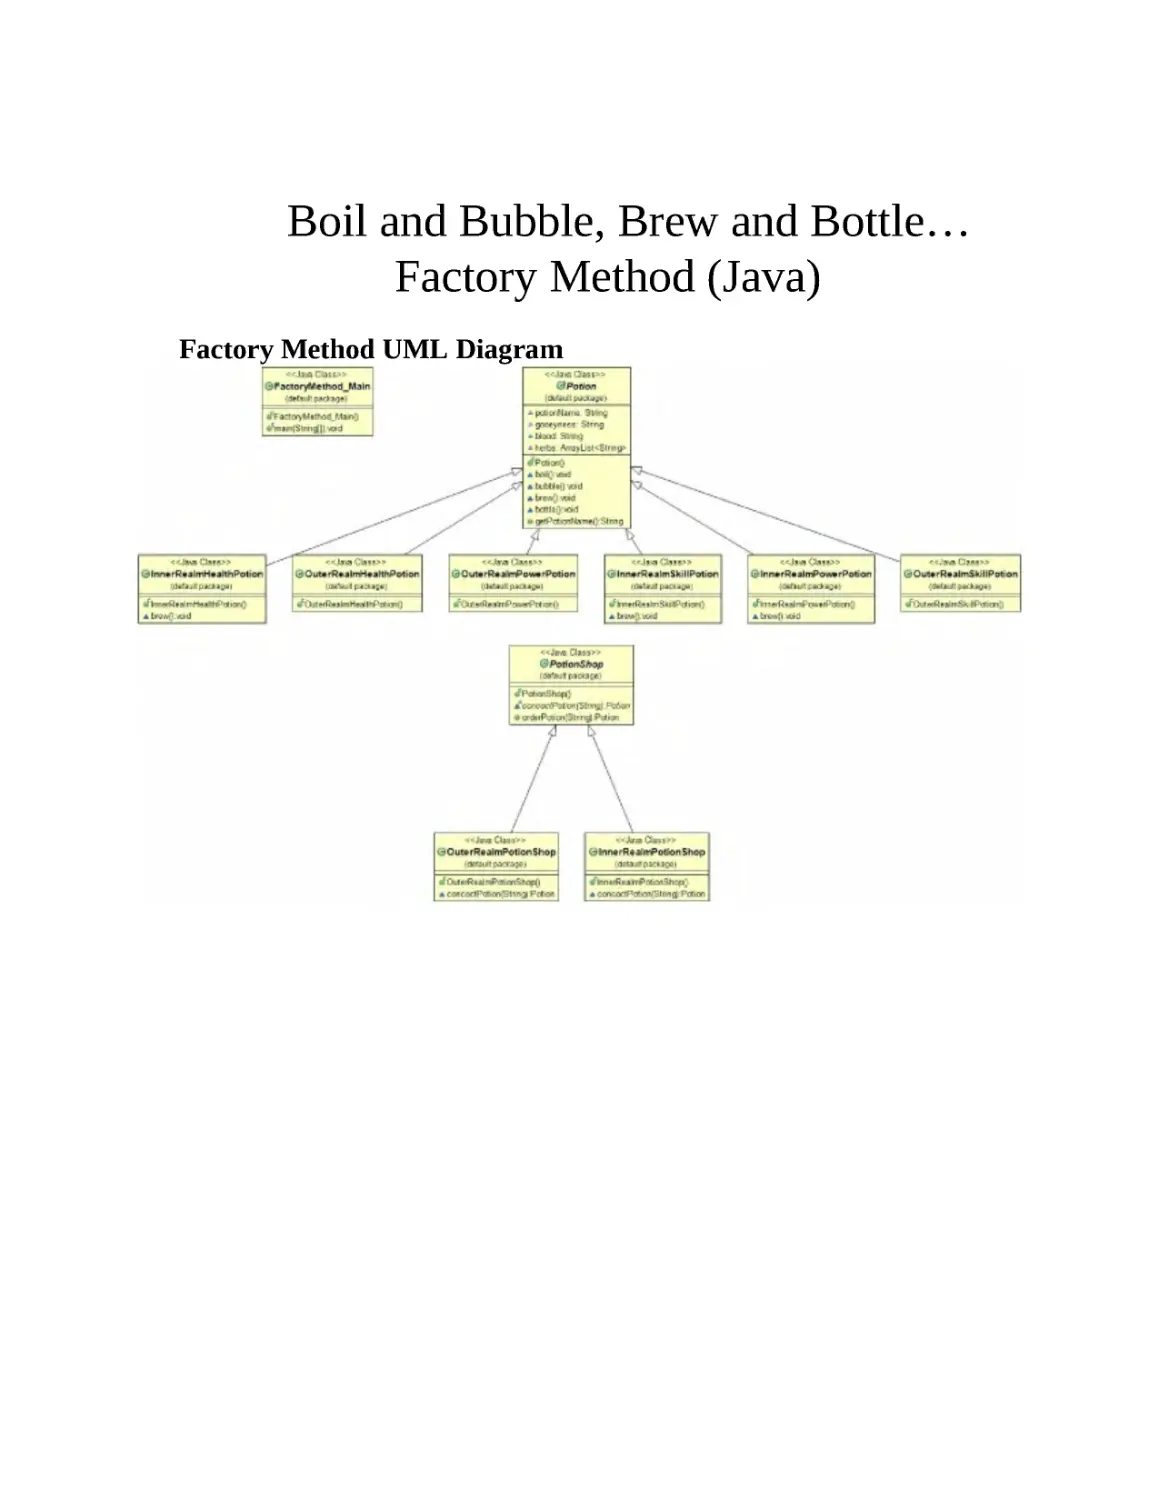 ﻿Boil and Bubble, Brew and Bottle… Factory Method øJava